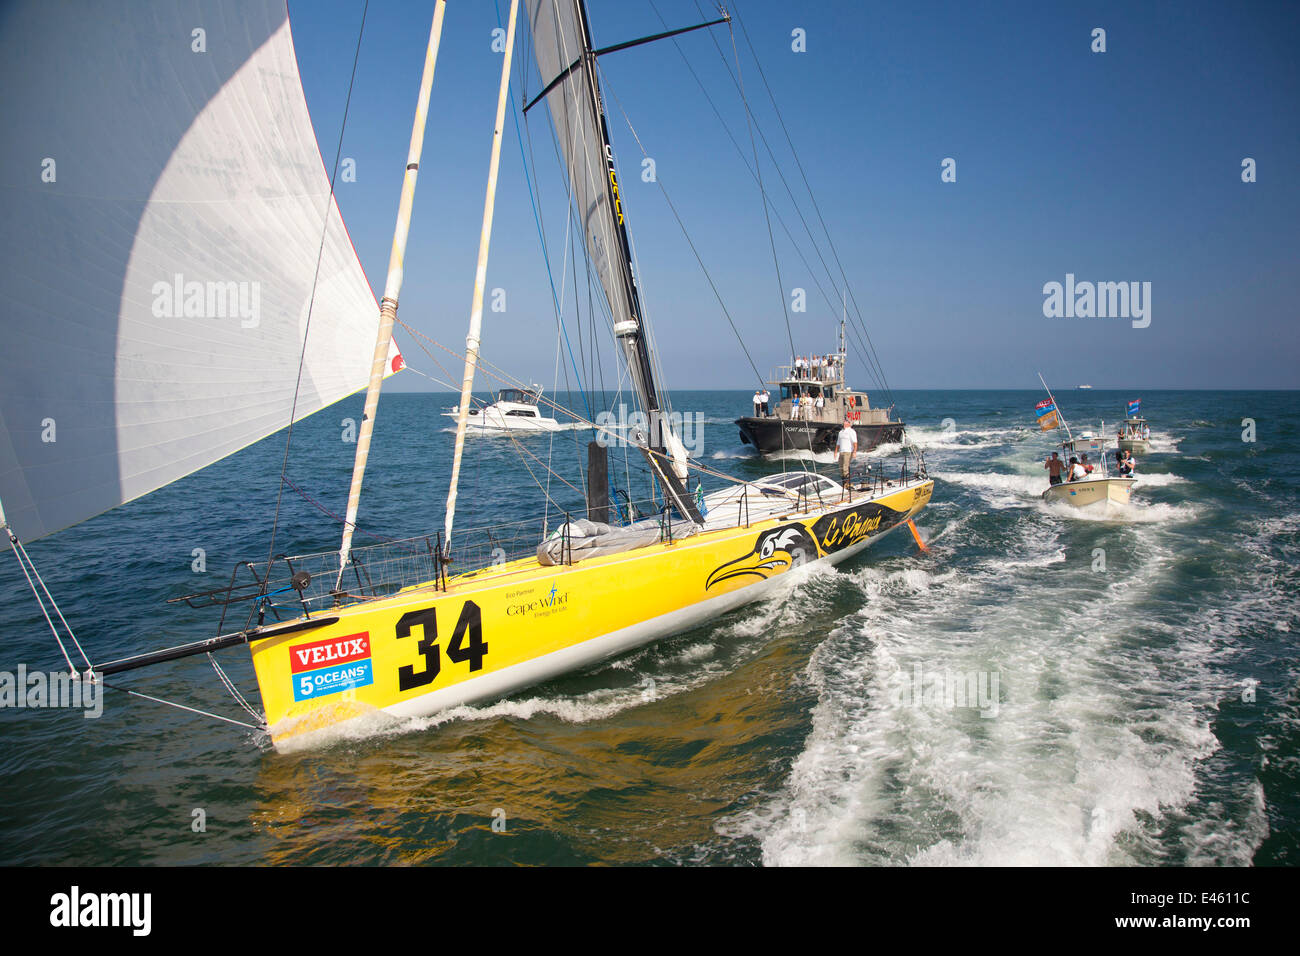 'Le Pingouin' skippered by Brad Van Liew finishing first in sprint four of the Velux 5 Oceans race. Charleston, South Carolina, USA, April 2011. All non-editorial uses must be cleared individually. Stock Photo